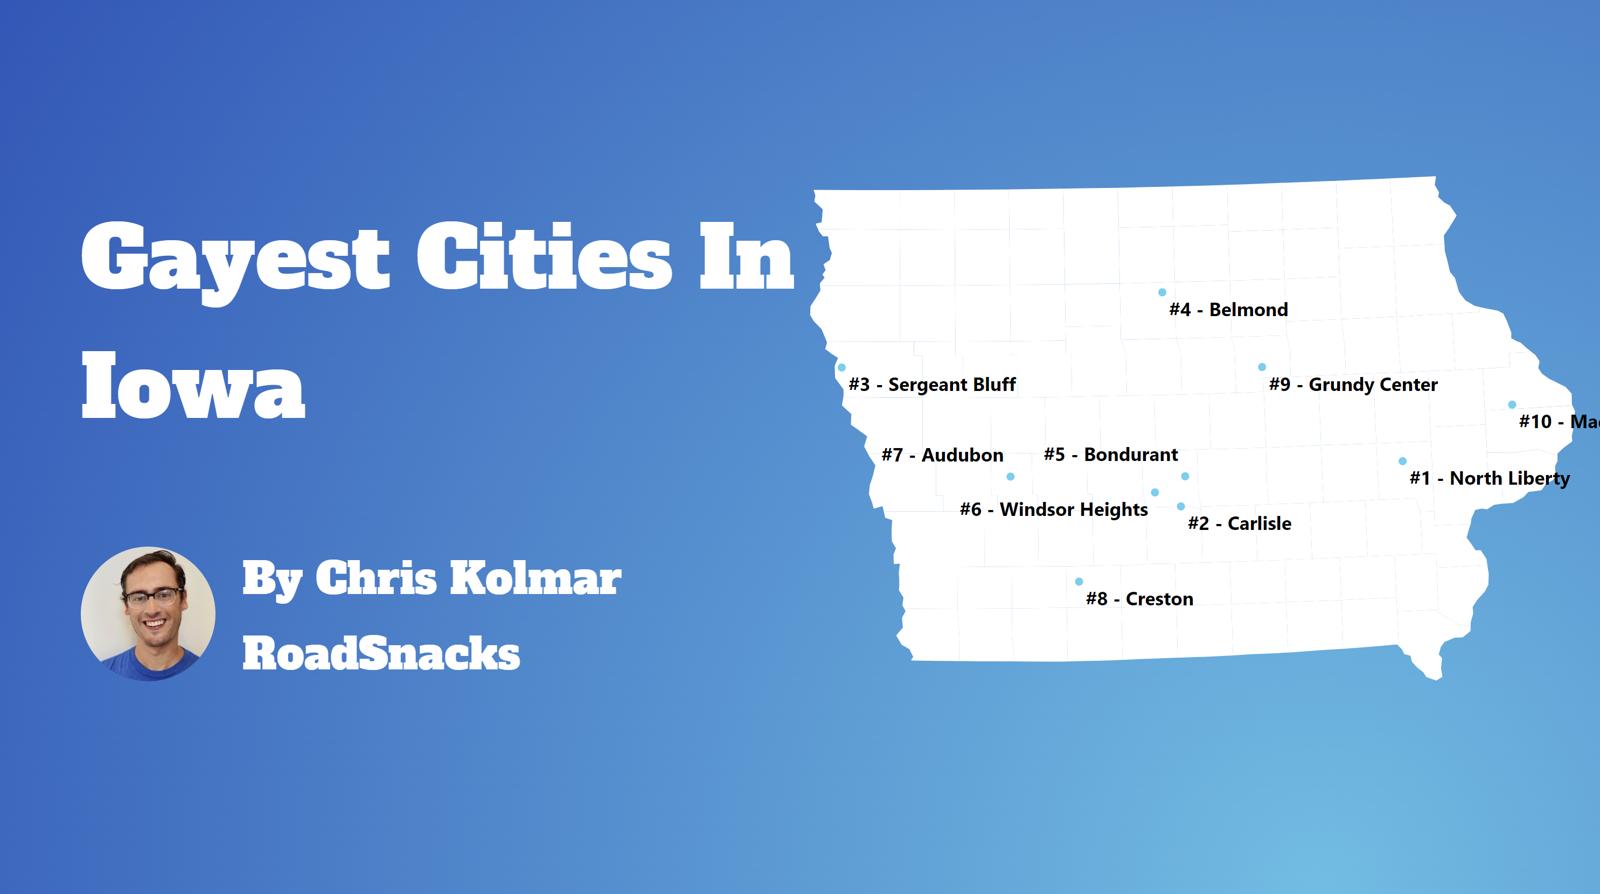 Gayest Cities In Iowa Map